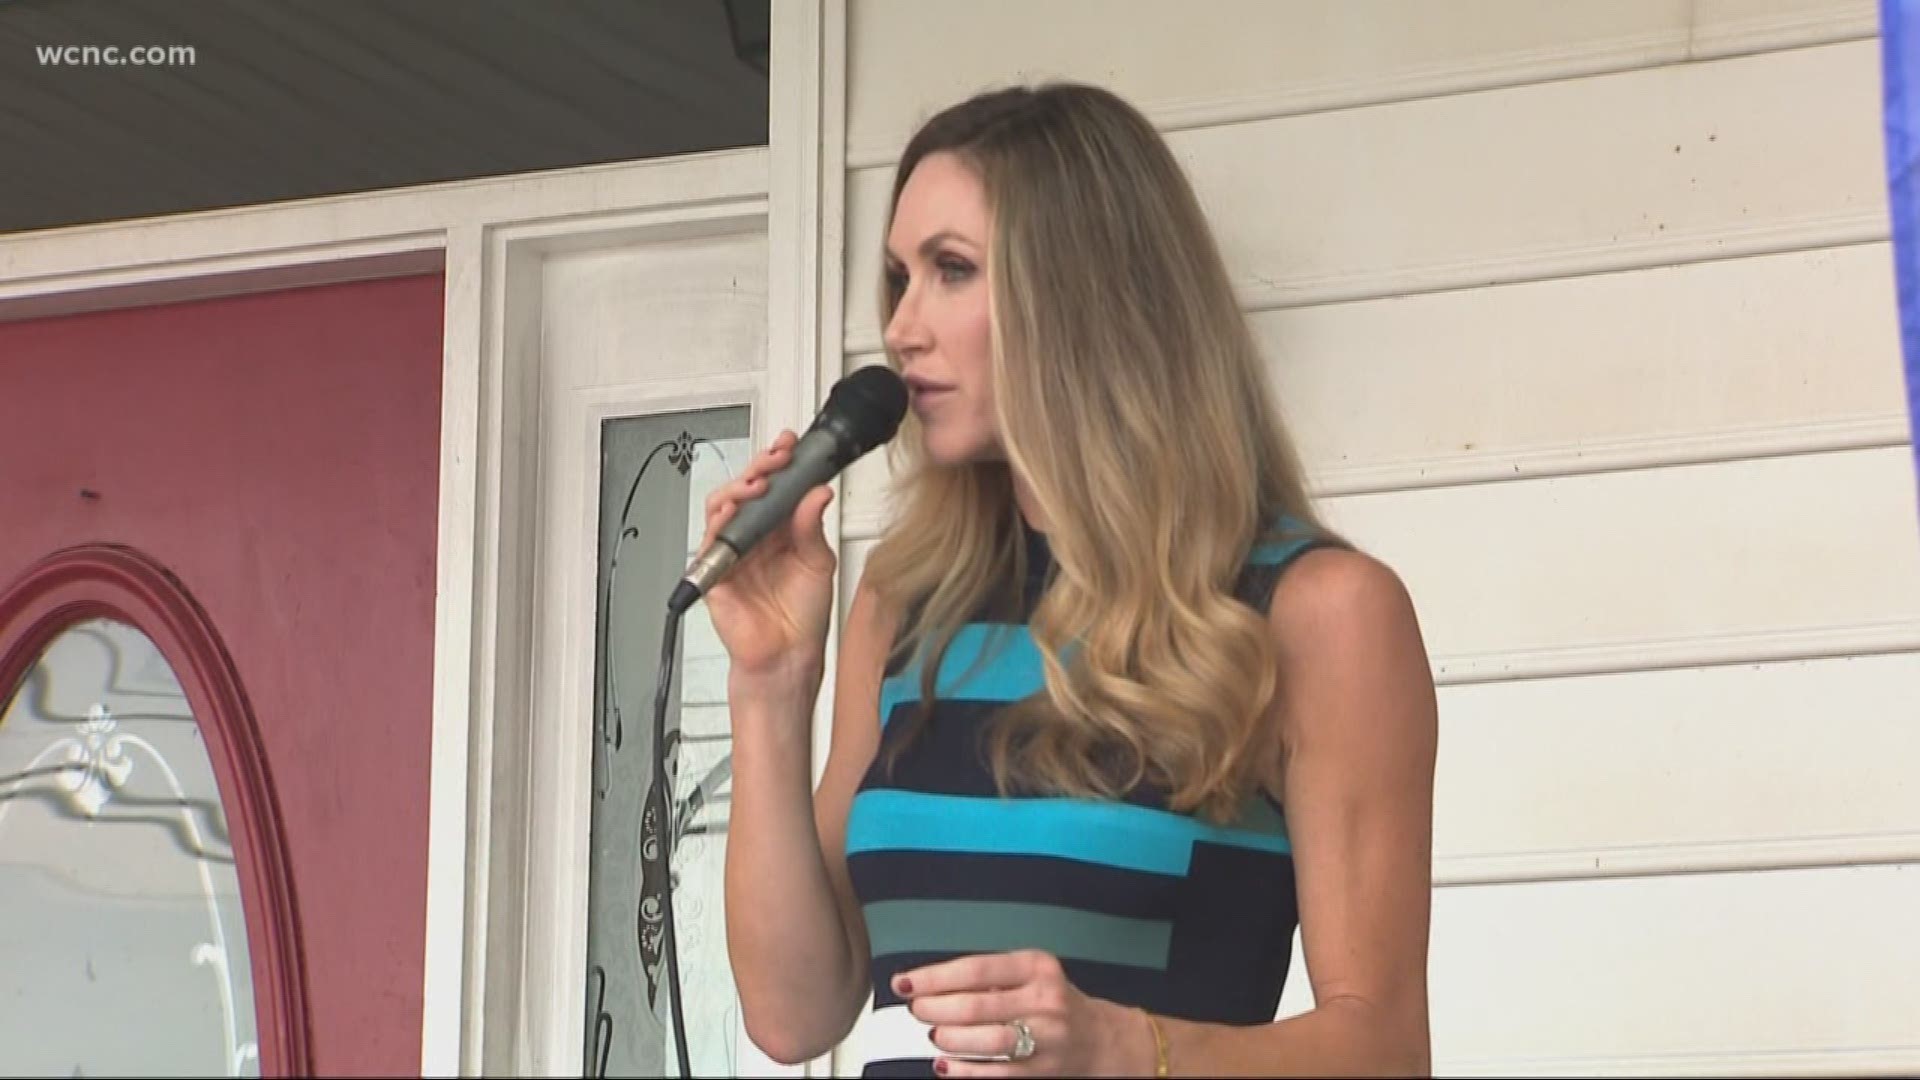 Lara Trump returned to her home state of North Carolina to campaign for Republican candidates.